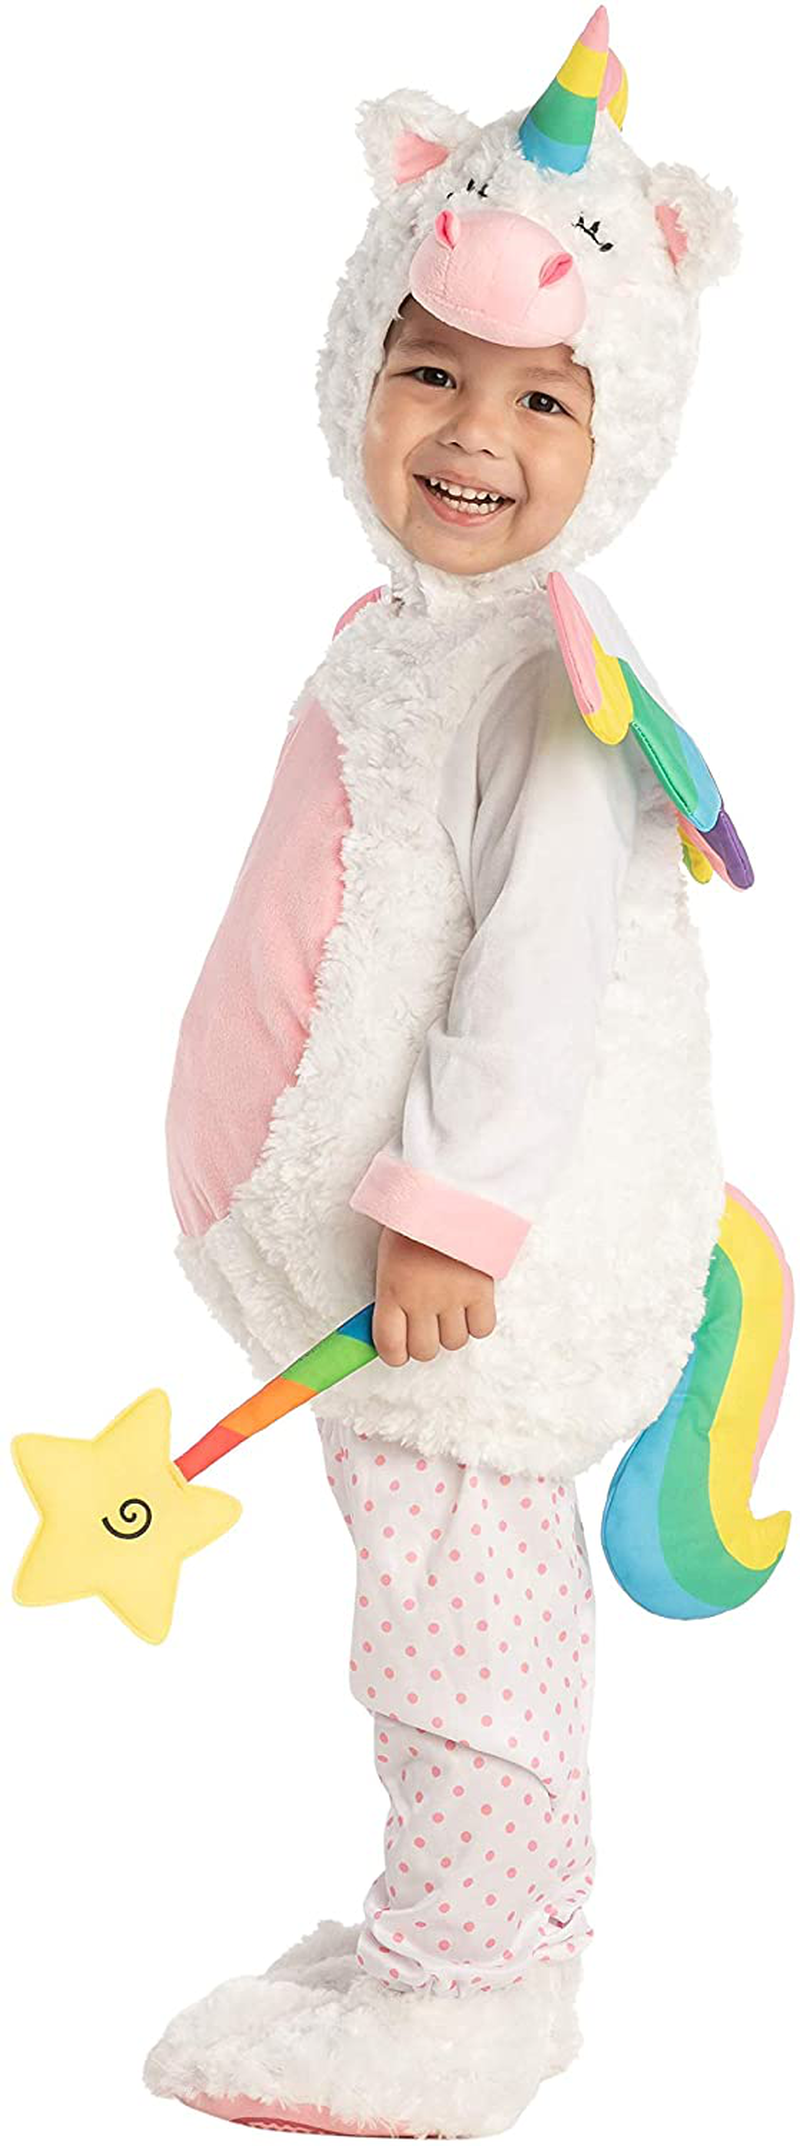 Cute Lil’ Baby Unicorn Costume for Halloween Infant Trick or Treating Party, Dress Up Apparel & Accessories > Costumes & Accessories > Costumes Spooktacular Creations   